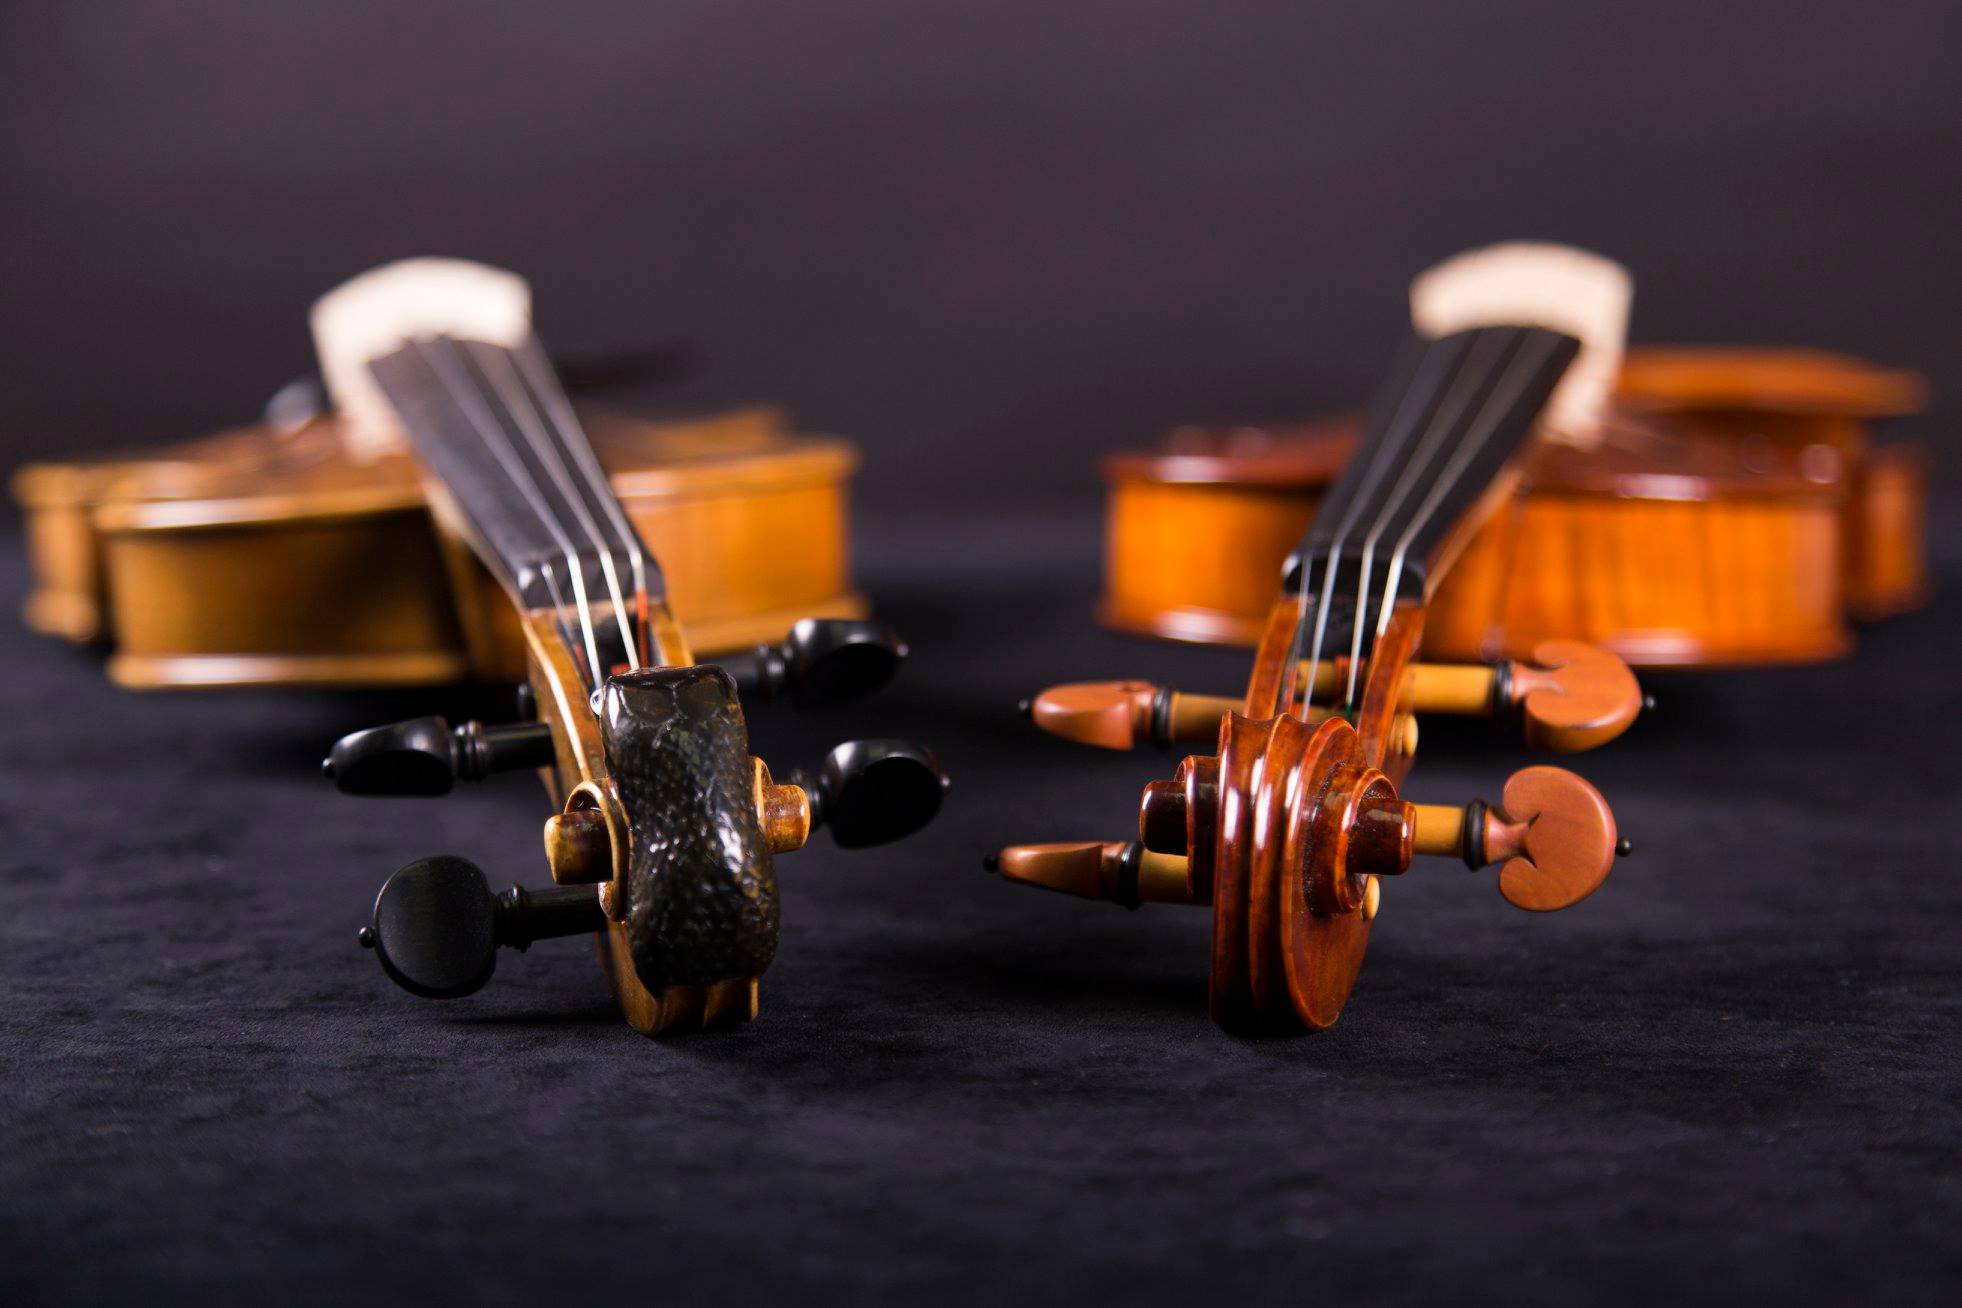 Violins crafted by András